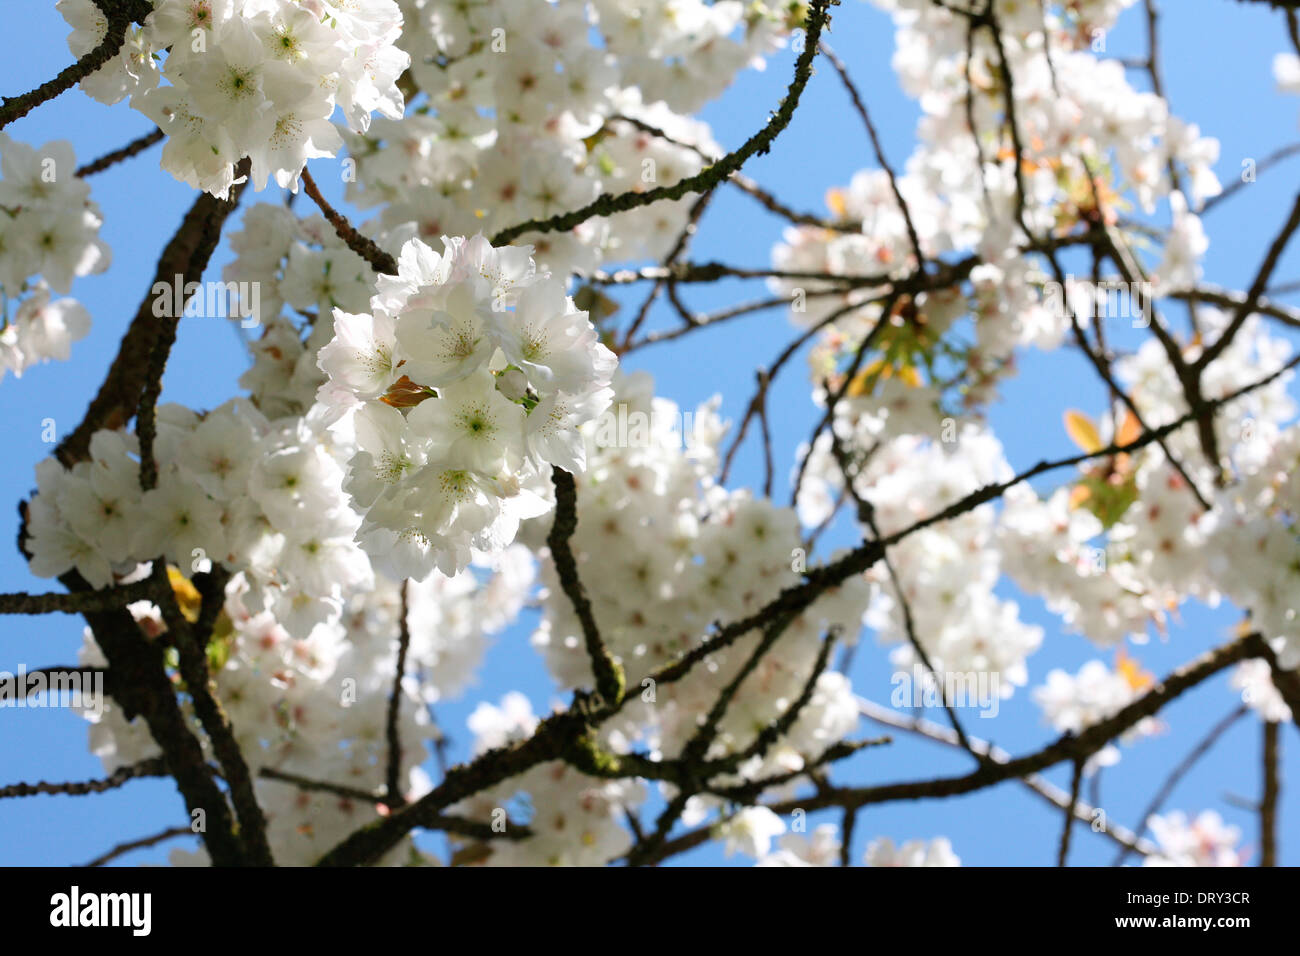 a taste of spring, beautiful blossom clusters of the great white cherry, Tai Haku  Jane Ann Butler Photography  JABP1125 Stock Photo